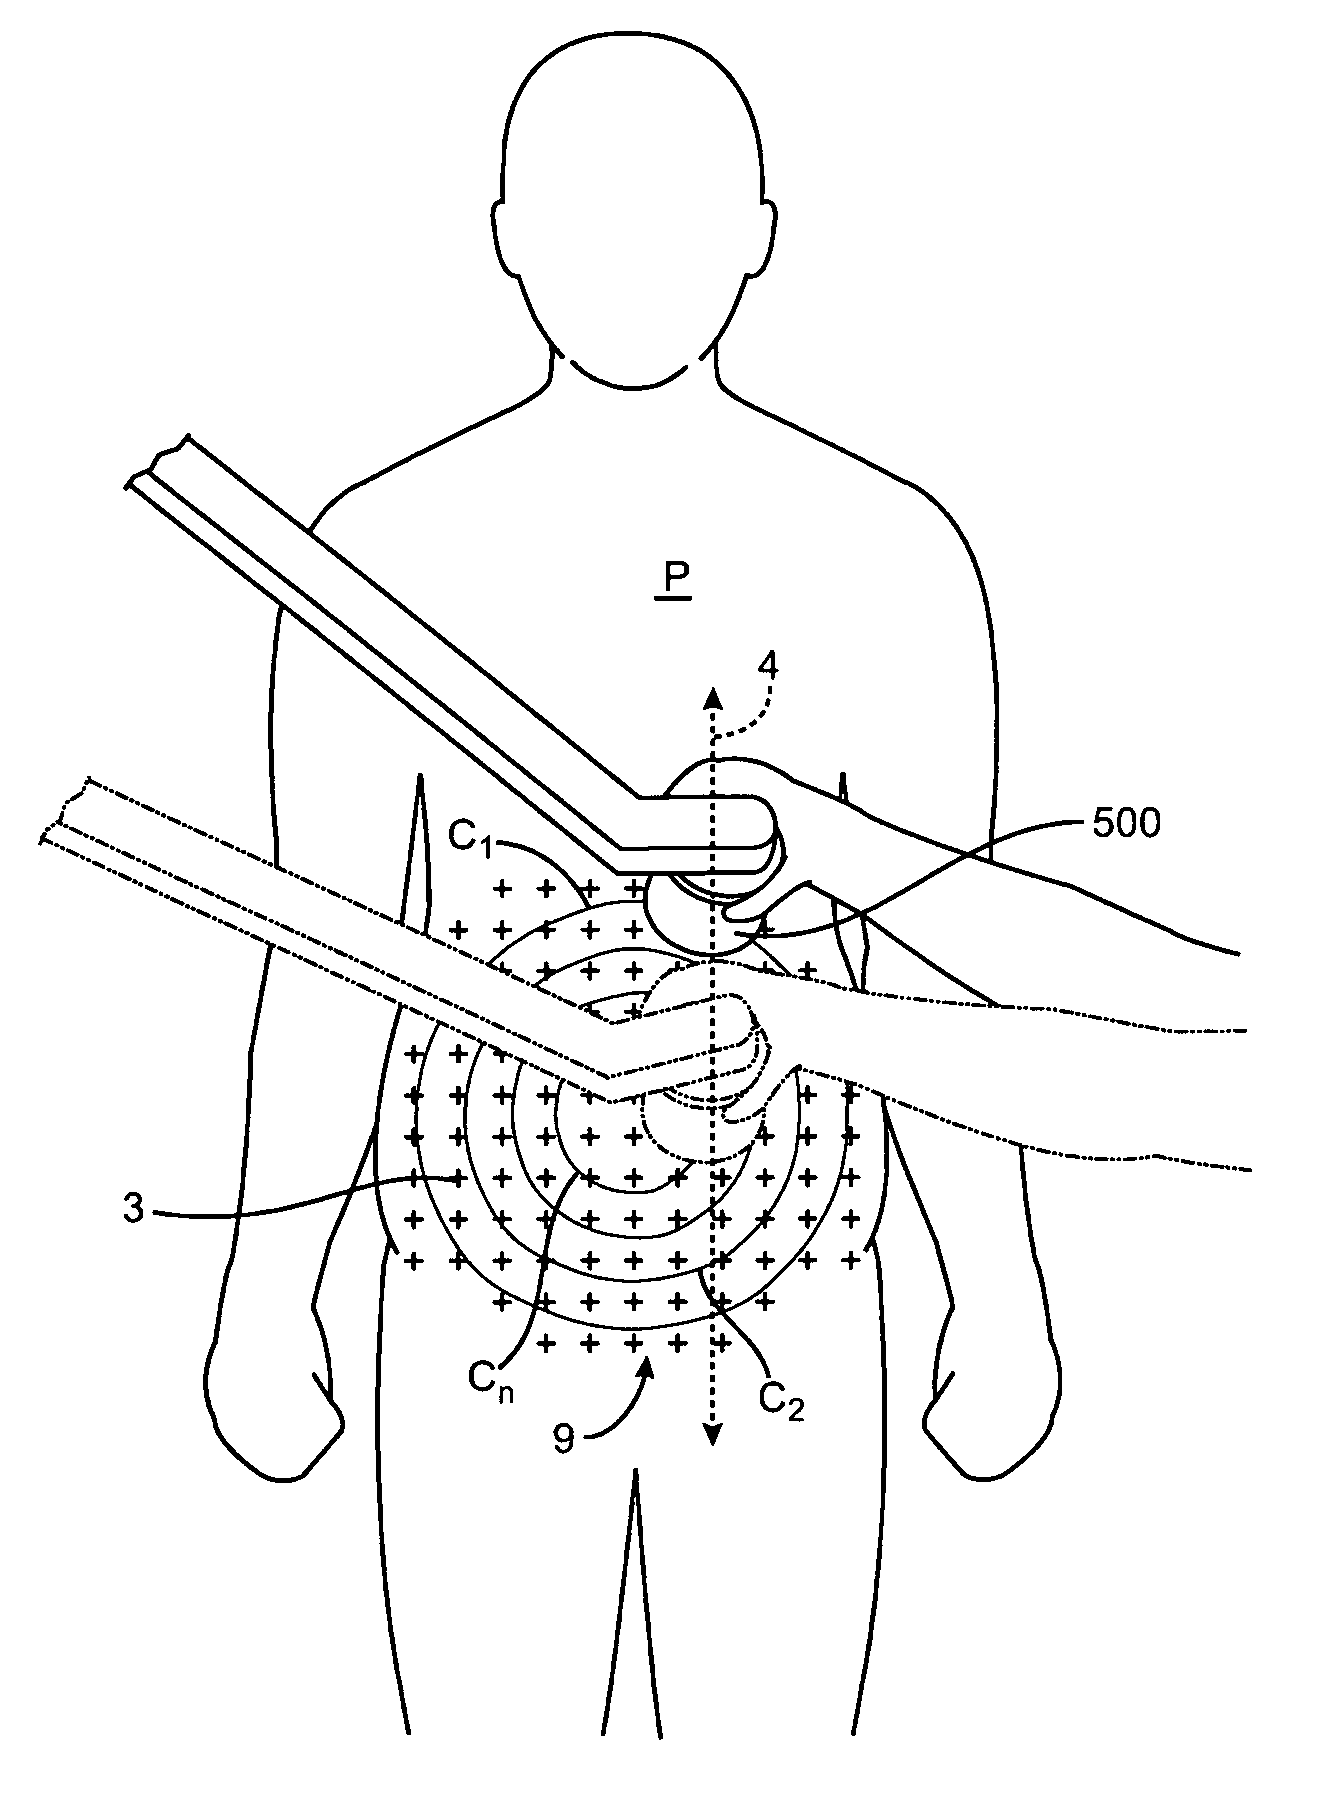 Apparatus and methods for the destruction of adipose tissue